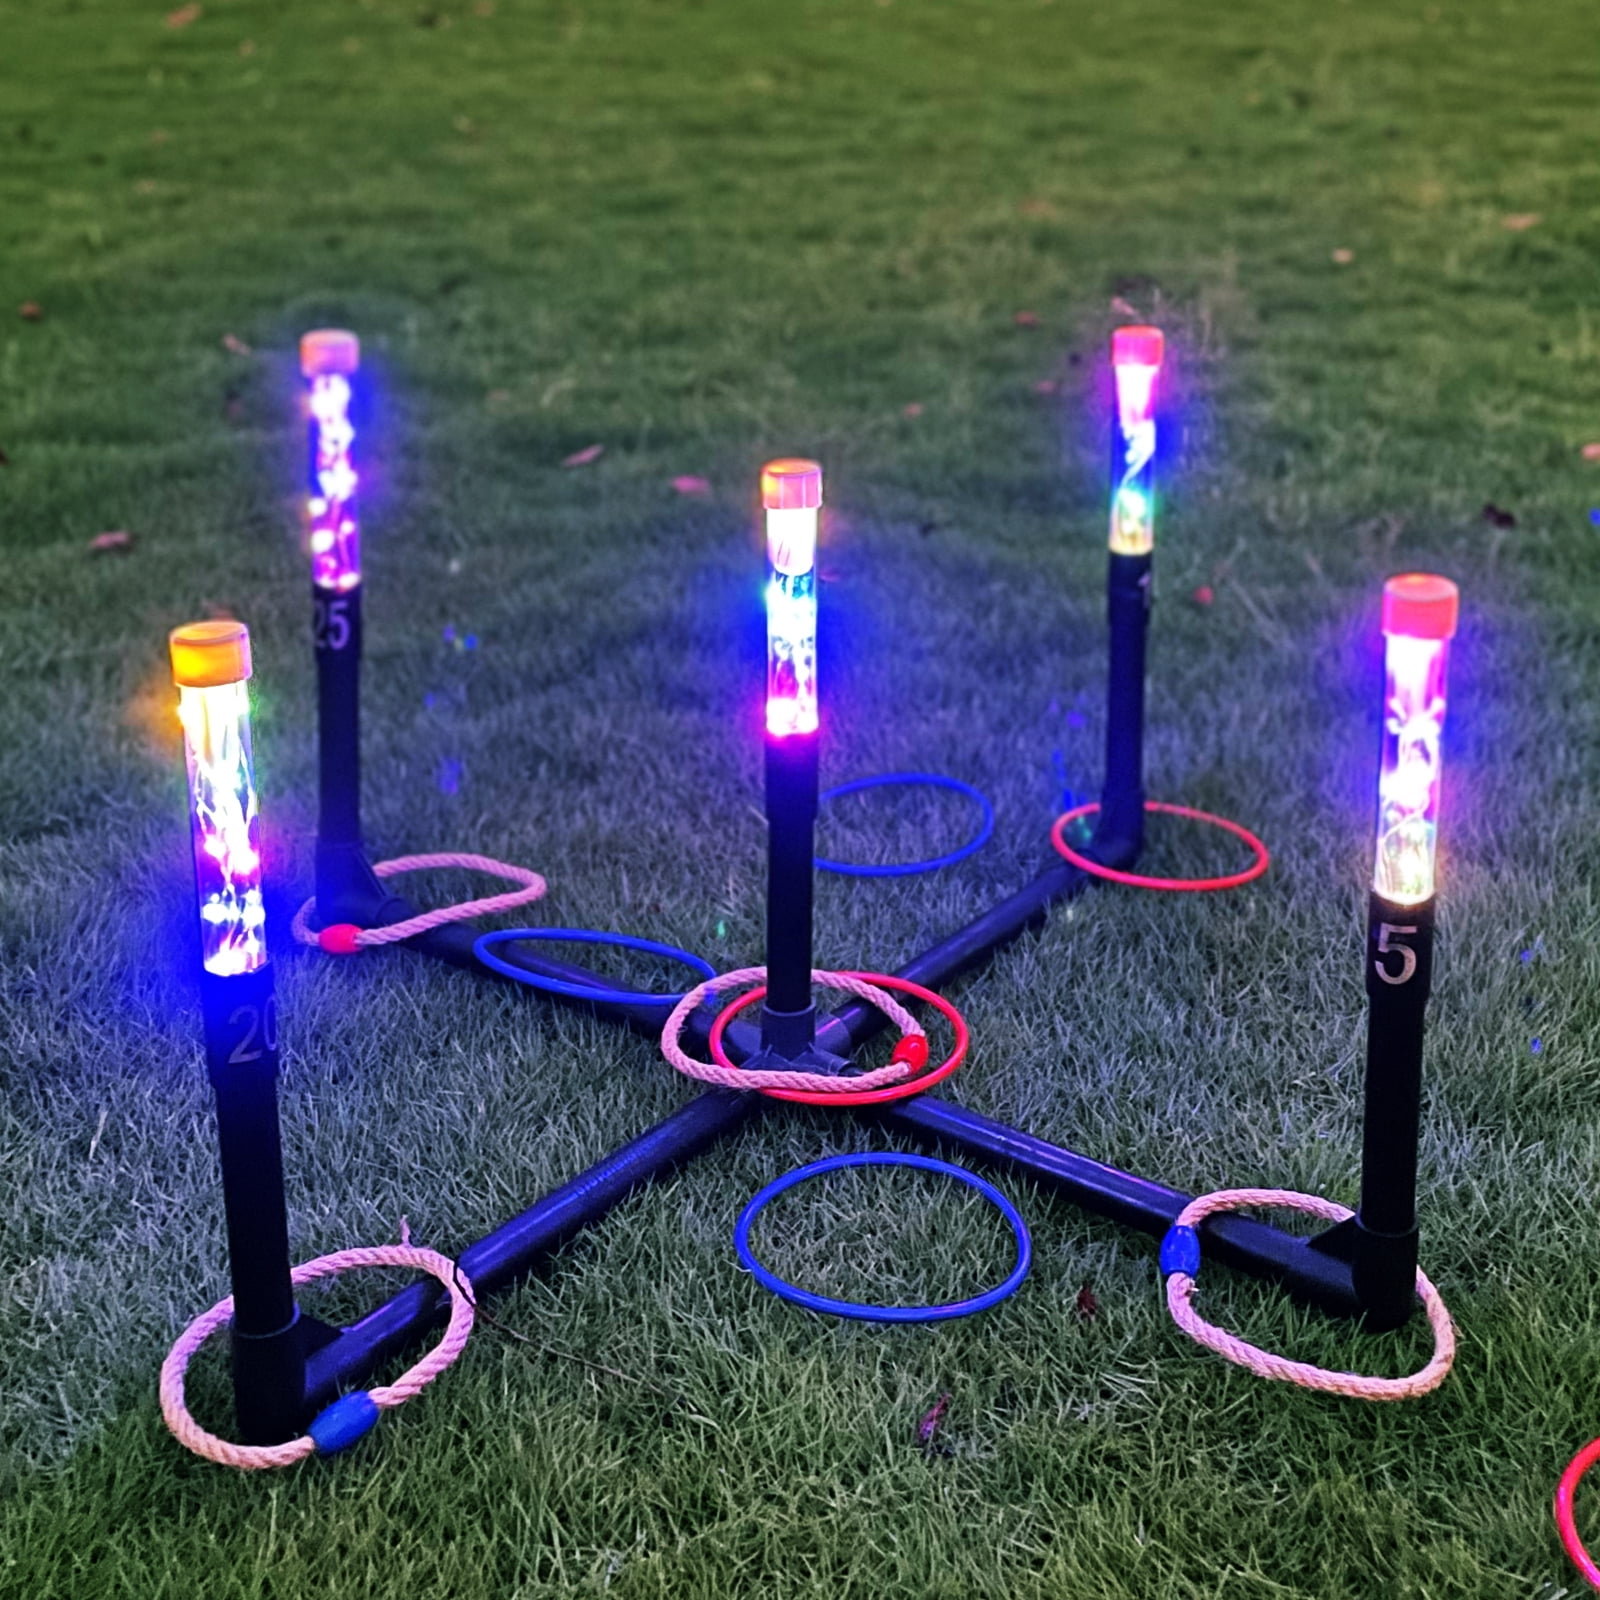 OTTARO Outdoor Games Glow in Dark for Adult and Kids, Giant Tic Tac Toe  Game Set with Light, Premium PVC Framed Yard Game for Famlily, Night Party